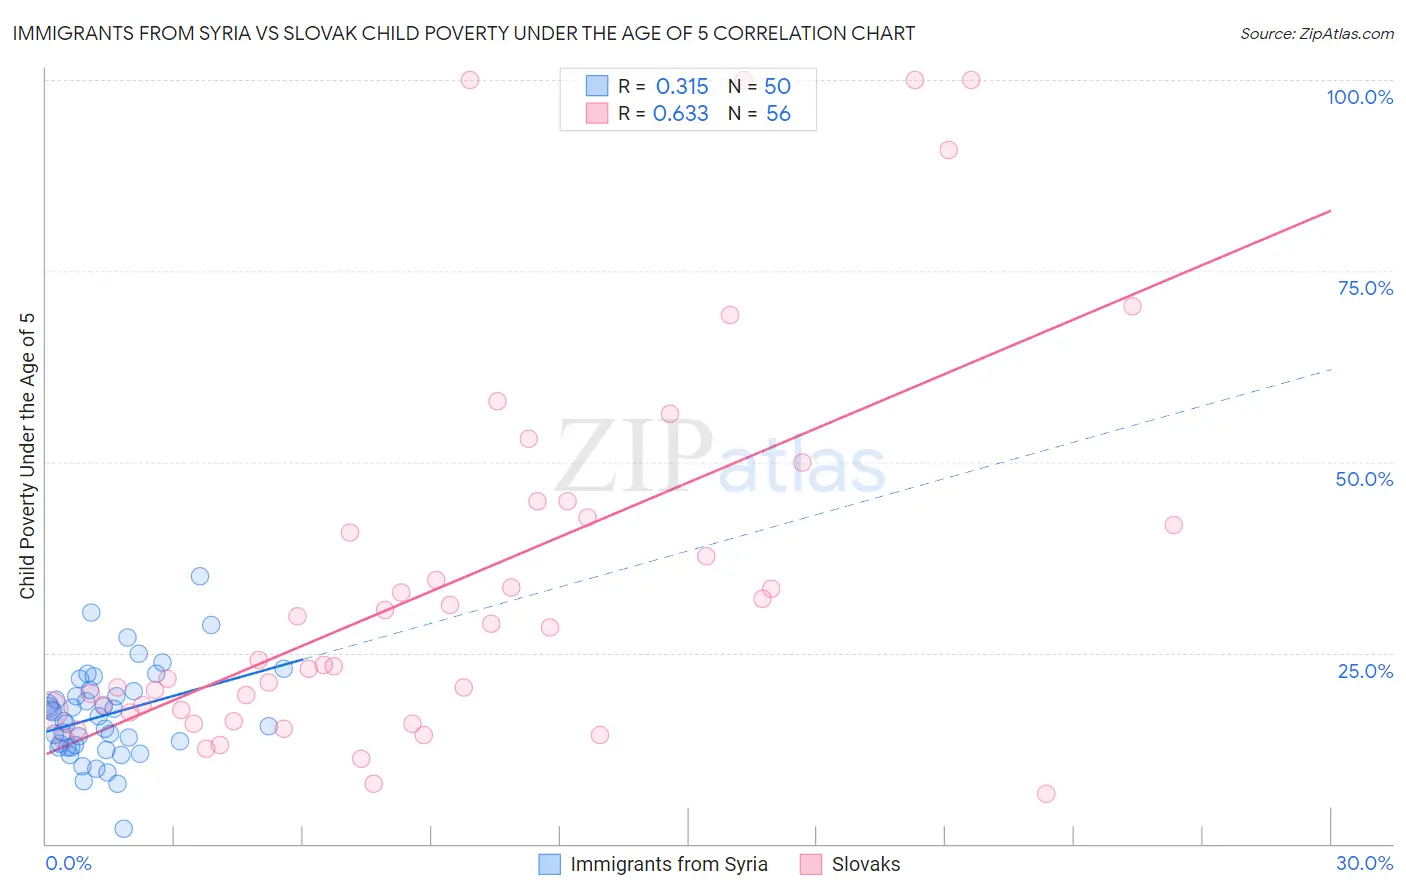 Immigrants from Syria vs Slovak Child Poverty Under the Age of 5